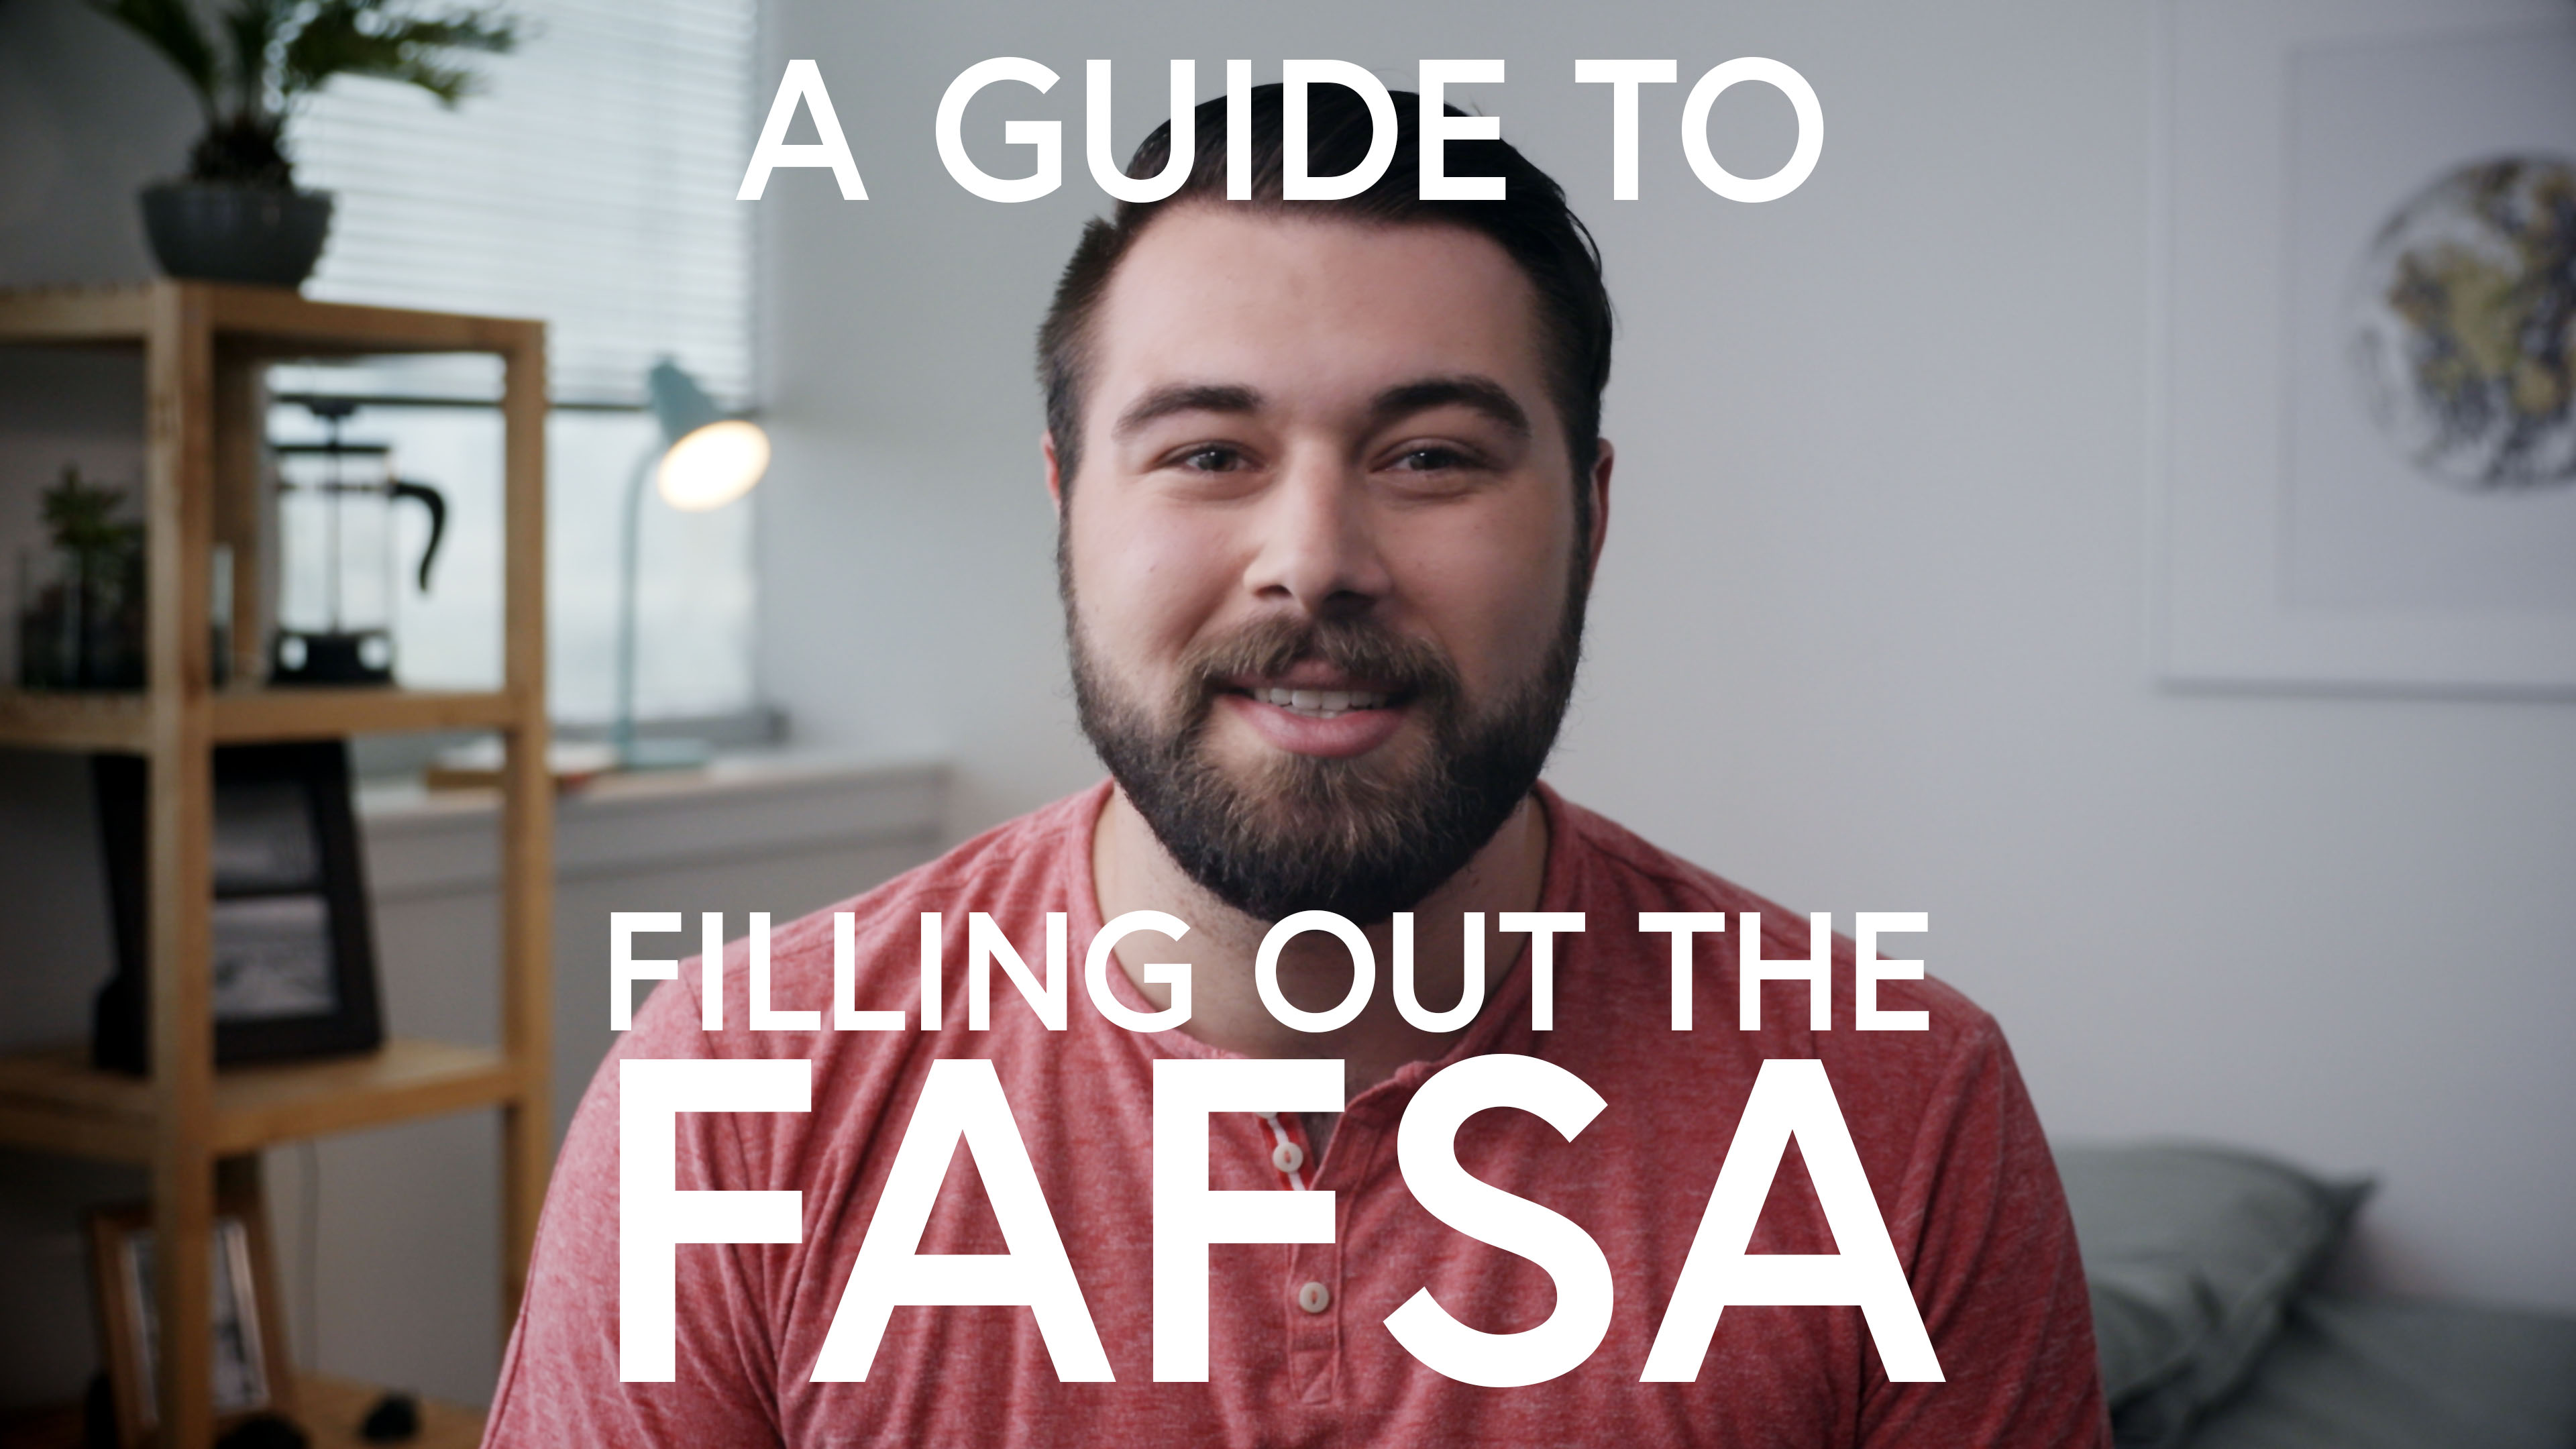 College Ave Student Loans Video Thumbnail:  A Guide to Filling Out the FASFA